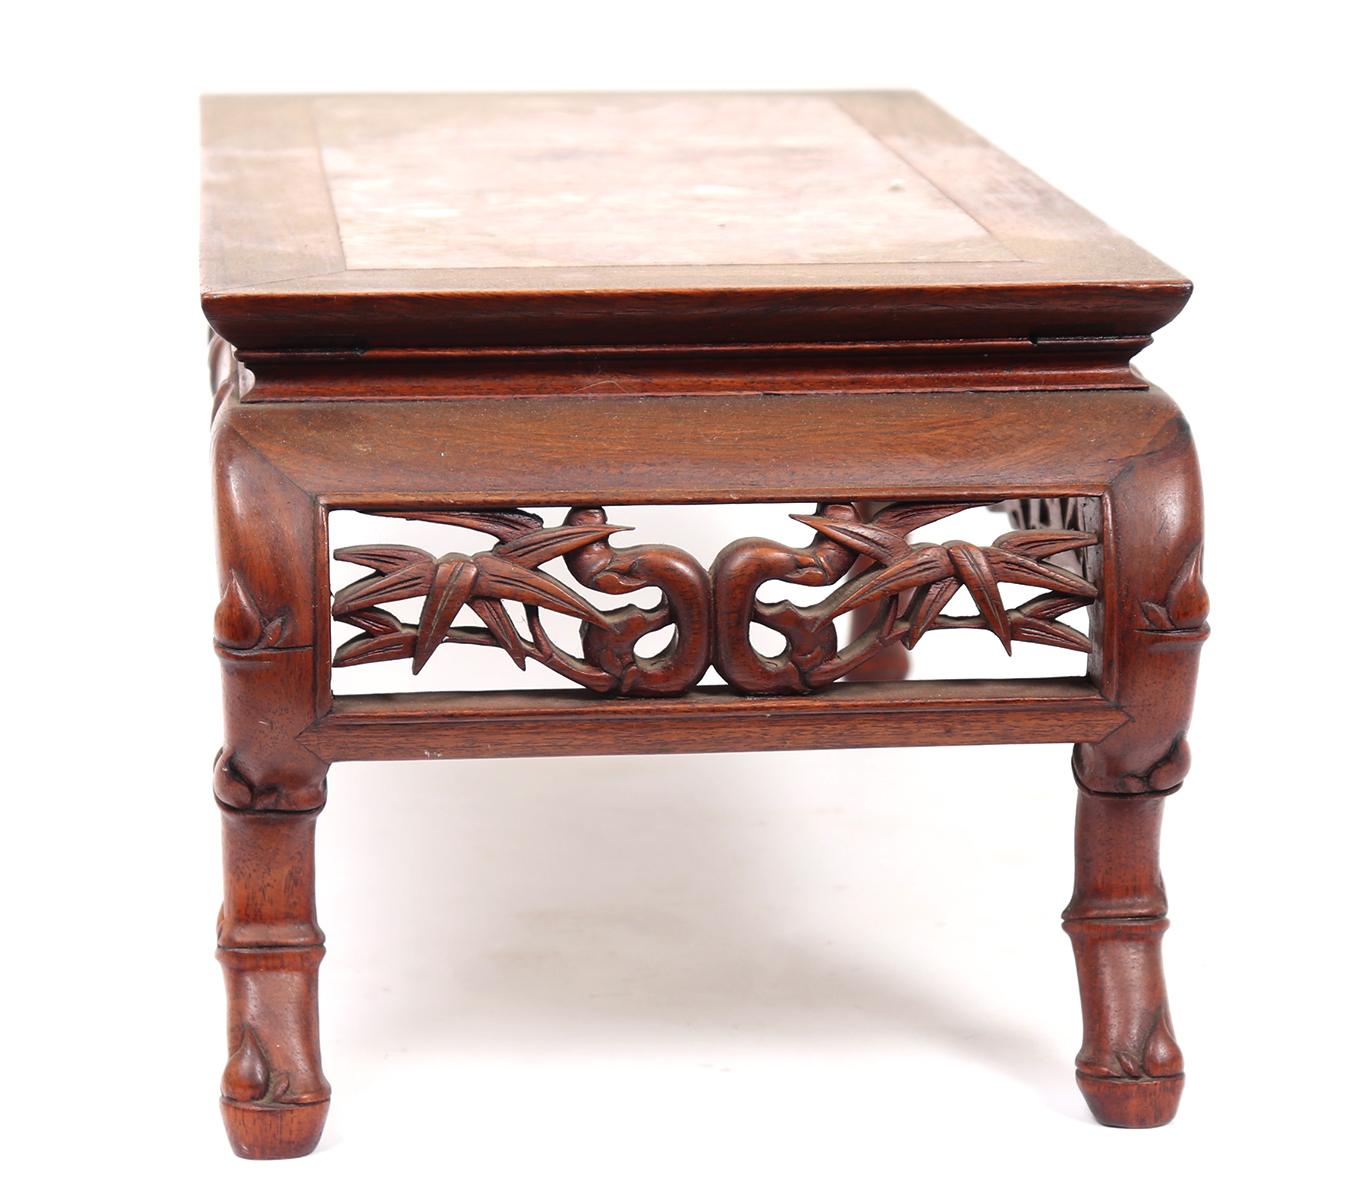 Lovely Chinese Marble Top Foot Rest